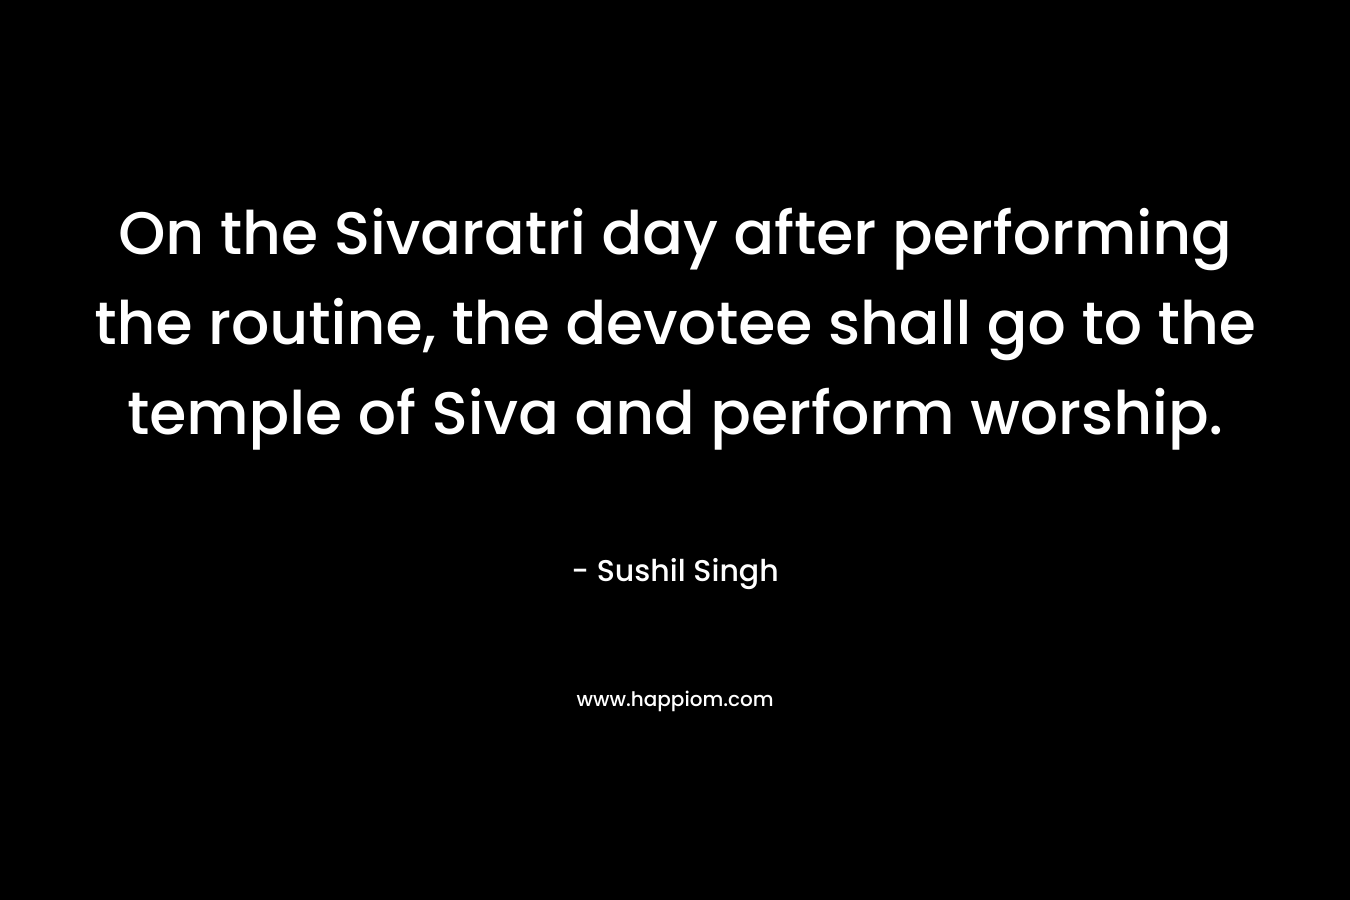 On the Sivaratri day after performing the routine, the devotee shall go to the temple of Siva and perform worship. – Sushil Singh